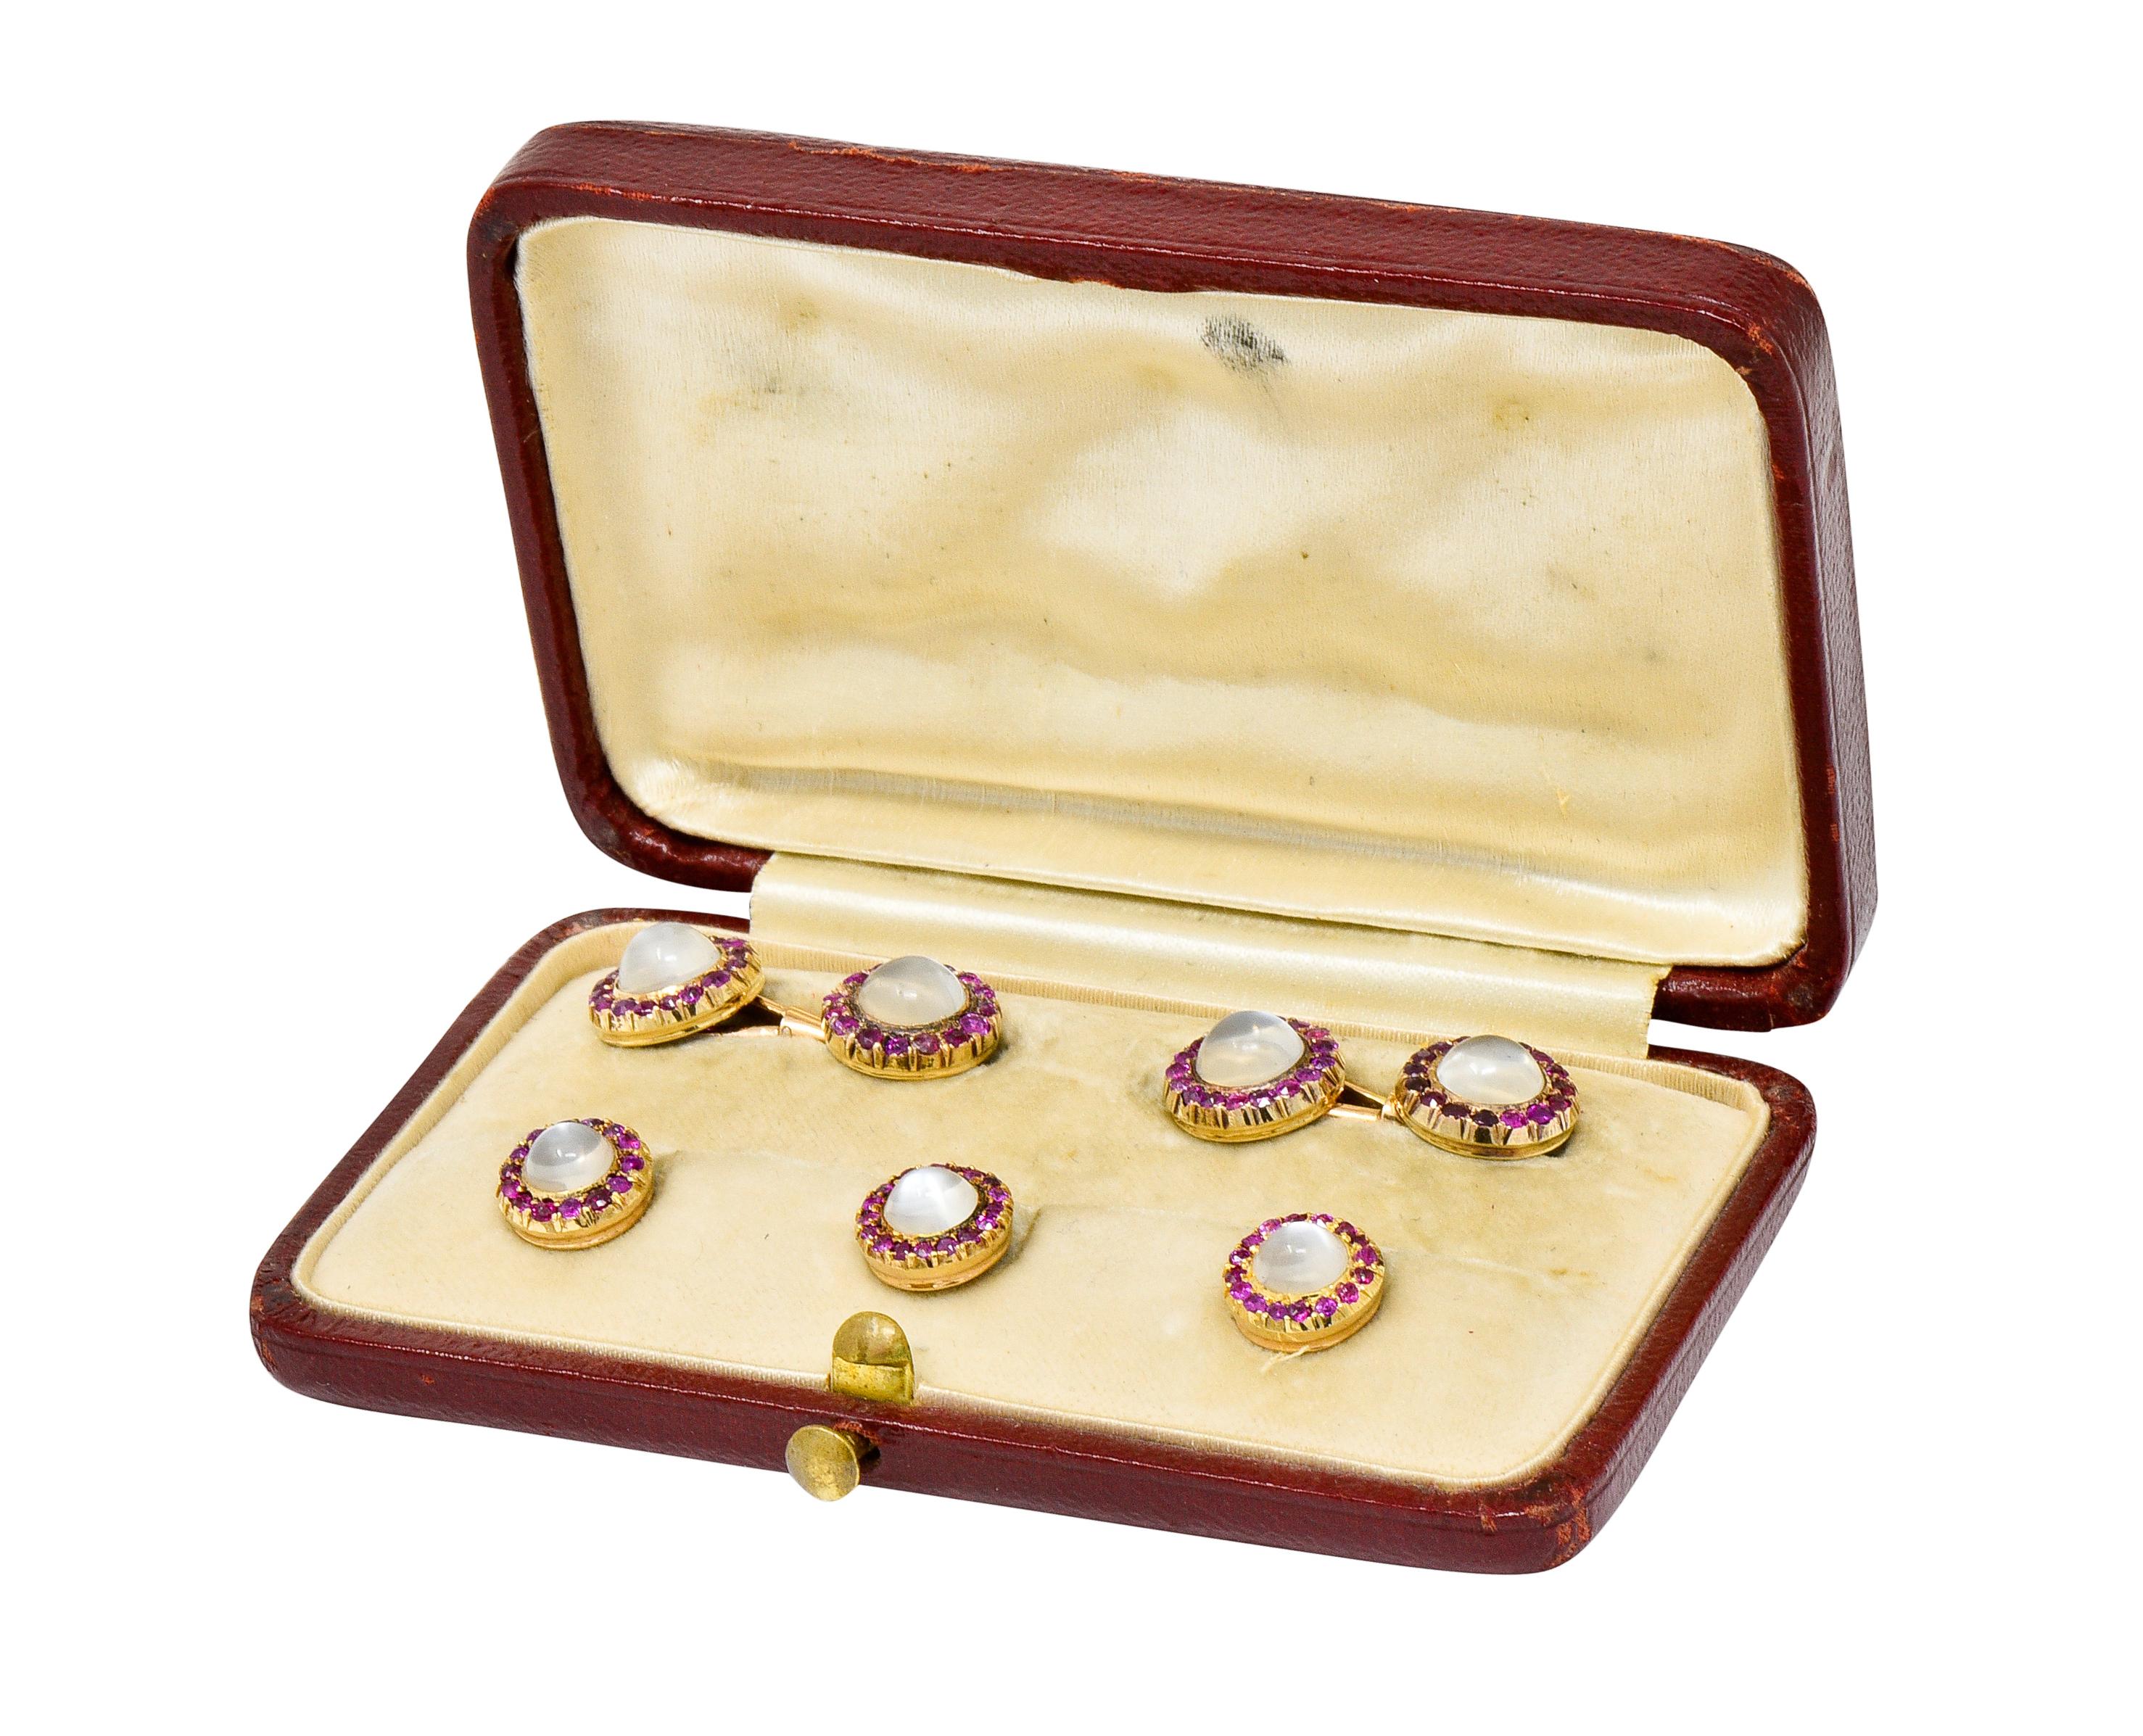 Link style cufflinks with both ends centering a round moonstone cabochon measuring approximately 7.0 mm

Surrounded by a halo of round cut rubies, red to purplish-red in color

With three matching lever style shirt studs centering a moonstone